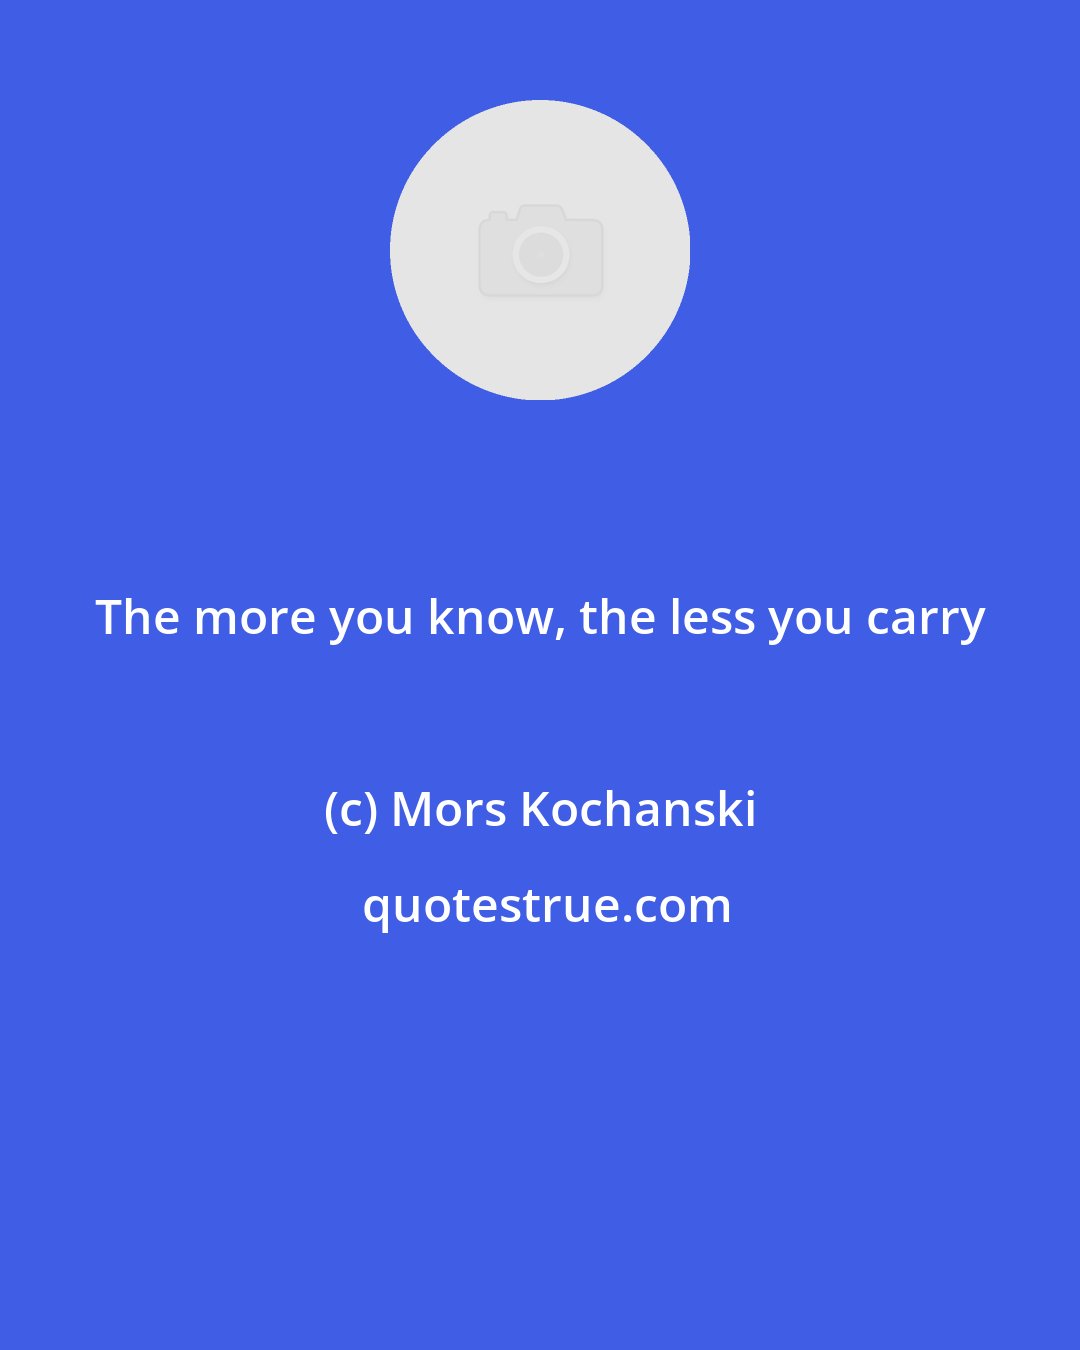 Mors Kochanski: The more you know, the less you carry